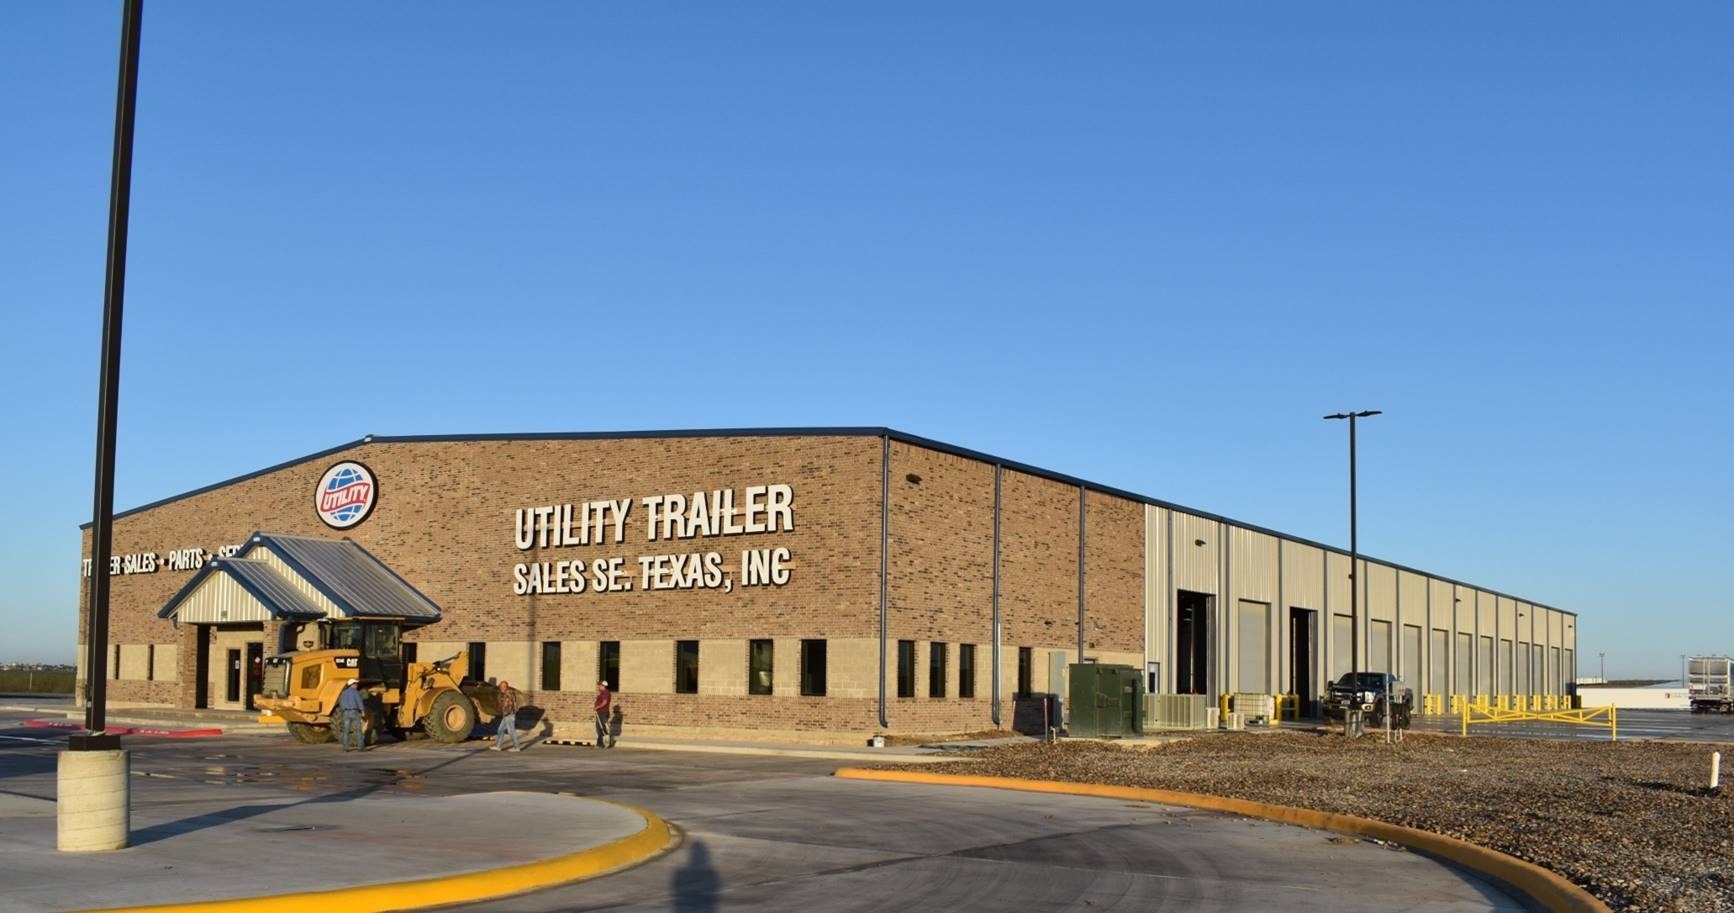 The new, dual-use facility located on historic Route 57 in the city of Eagle Pass, TX, is ideally located to service the new Utility refrigerated trailer factory in Piedras Negras, Coahuila, Mexico, just three miles down the road.